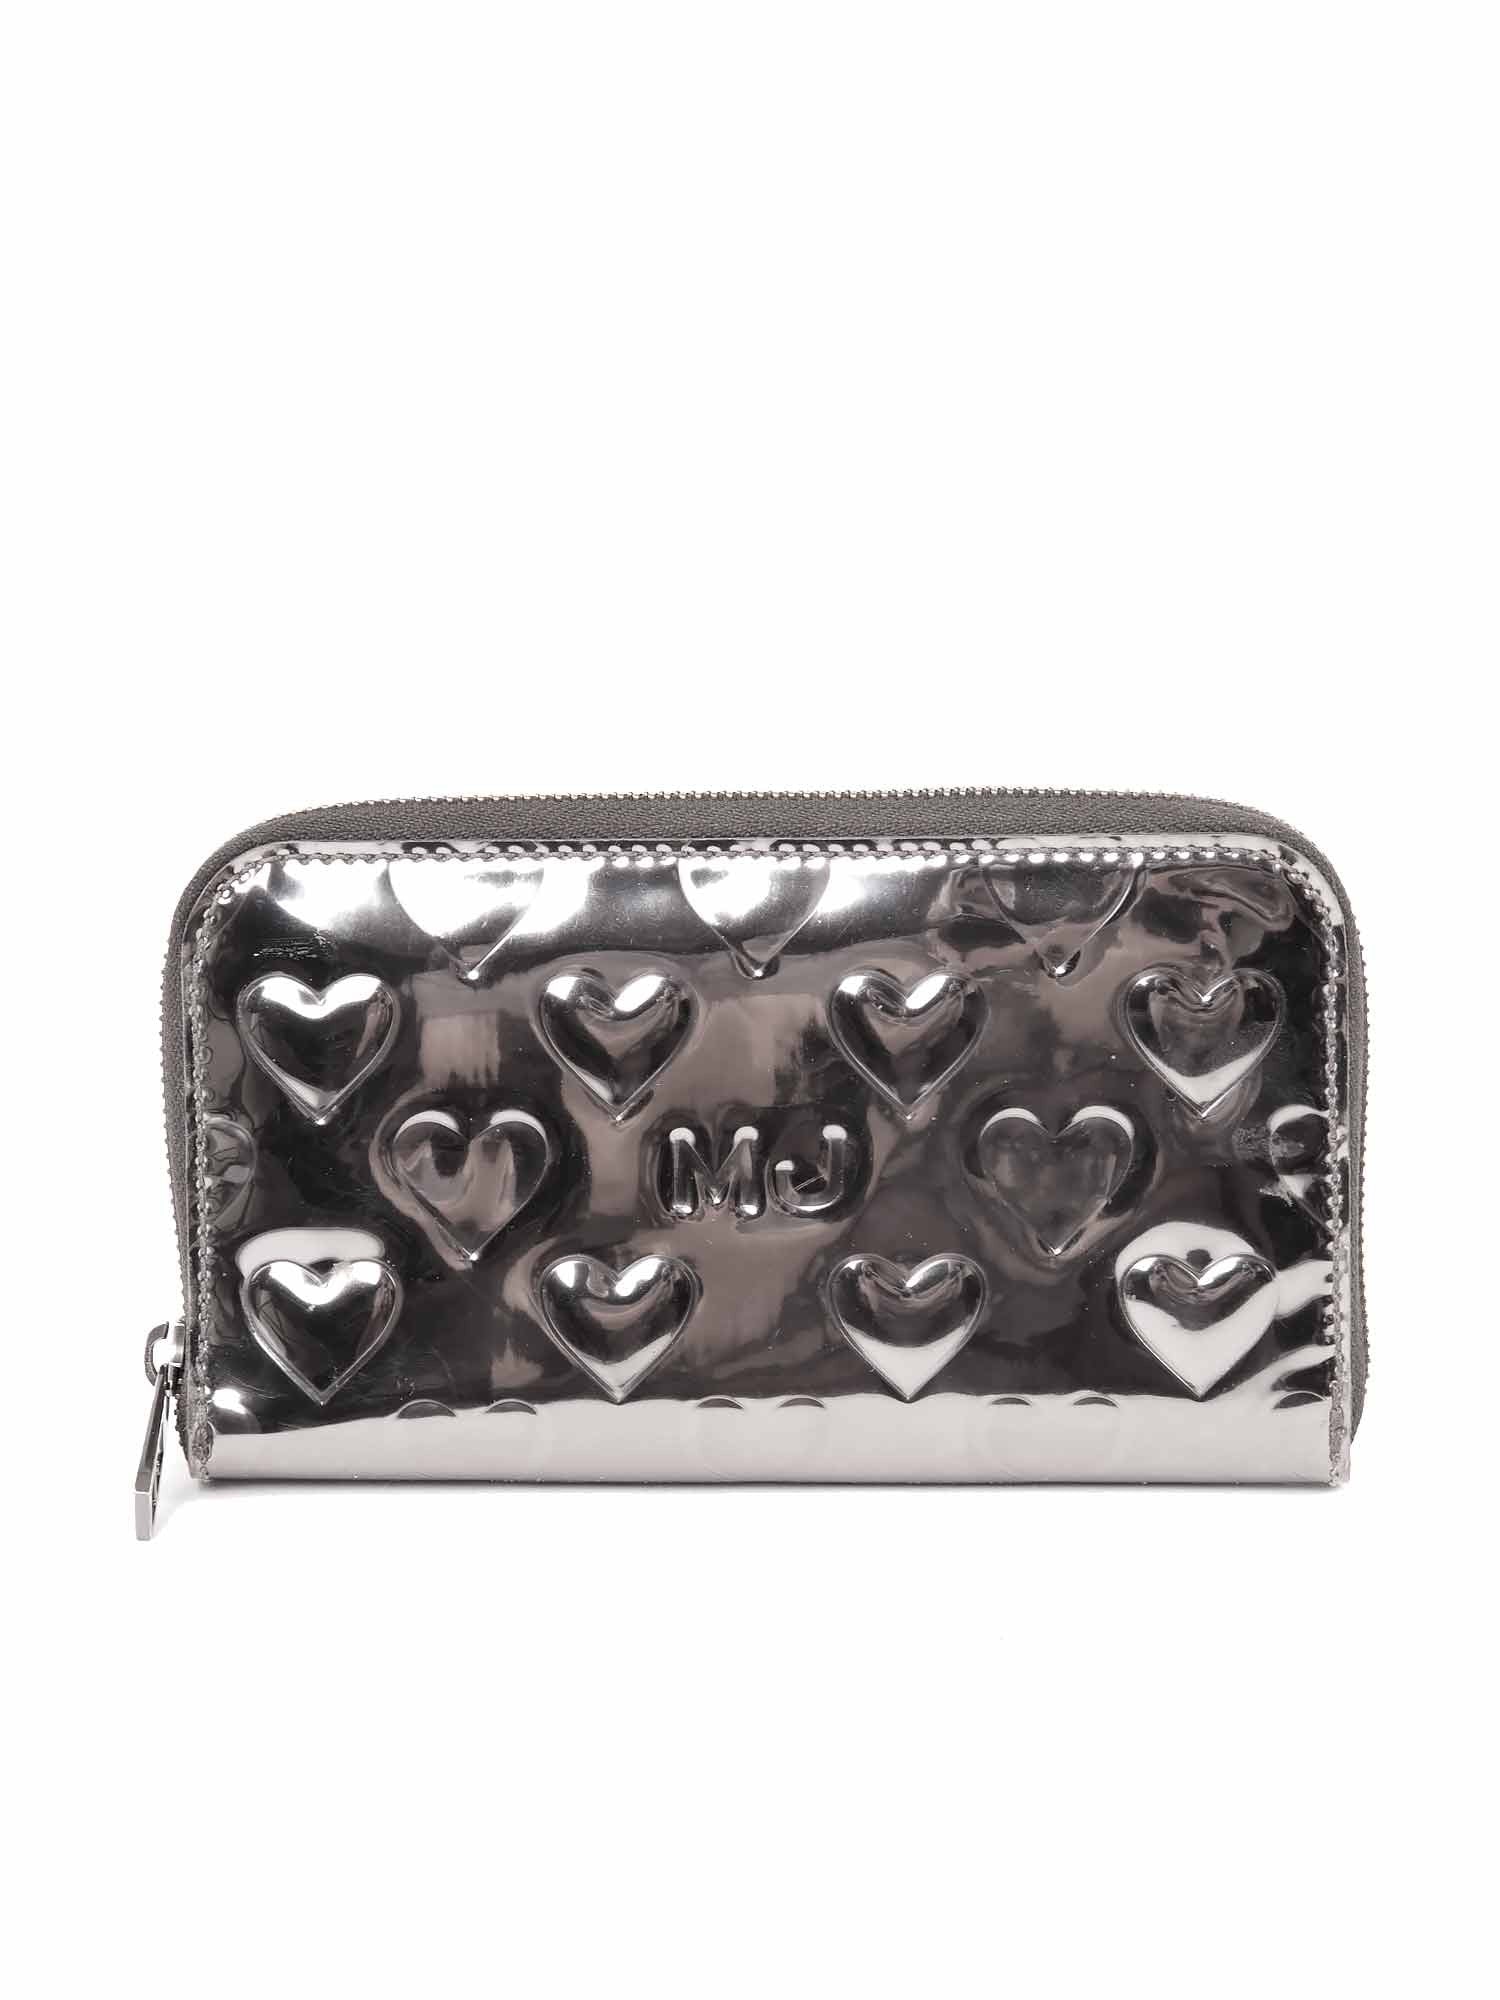 Pre-owned Marc by Marc Jacobs Mirror Heart Zip Around Wallet | Sabrina